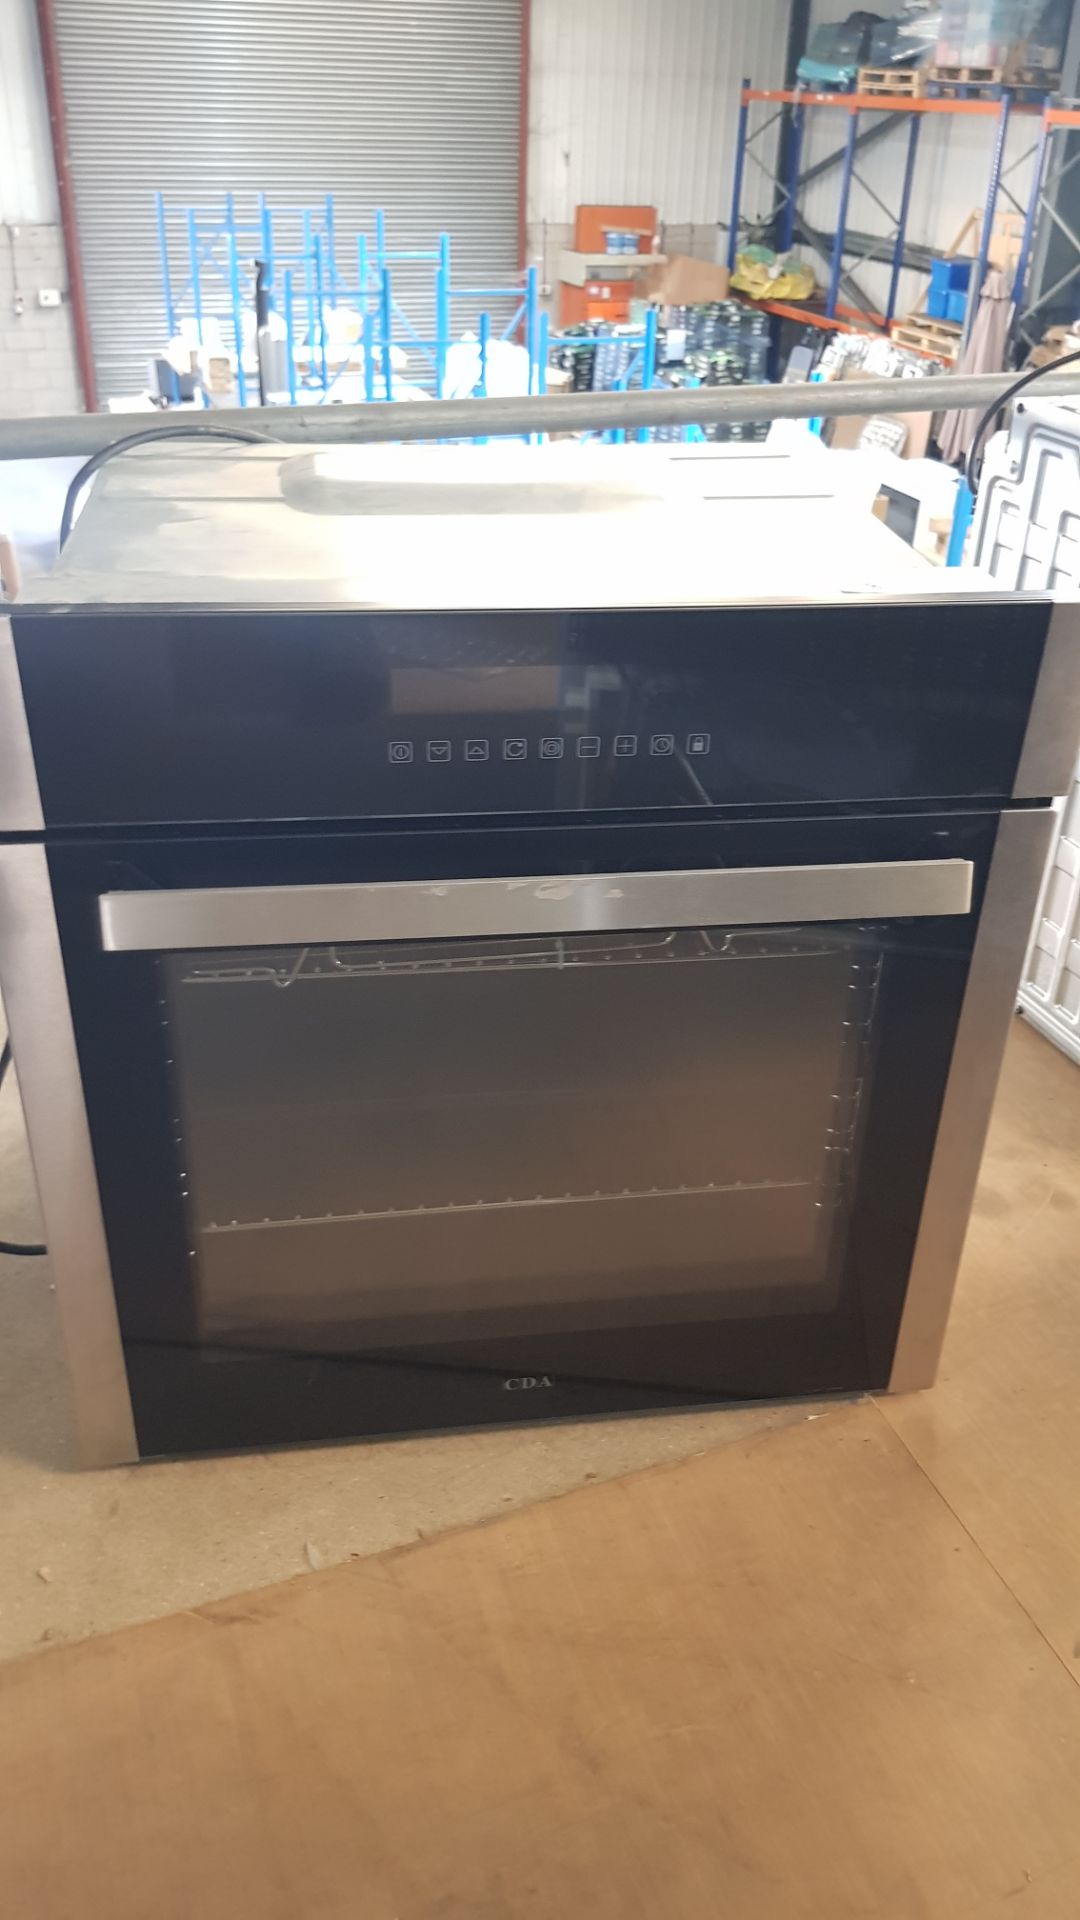 Current Online Price £389. CDA SK410SS Ten Function LCD Electric Multi Function Oven Stainless Steel - Image 5 of 14